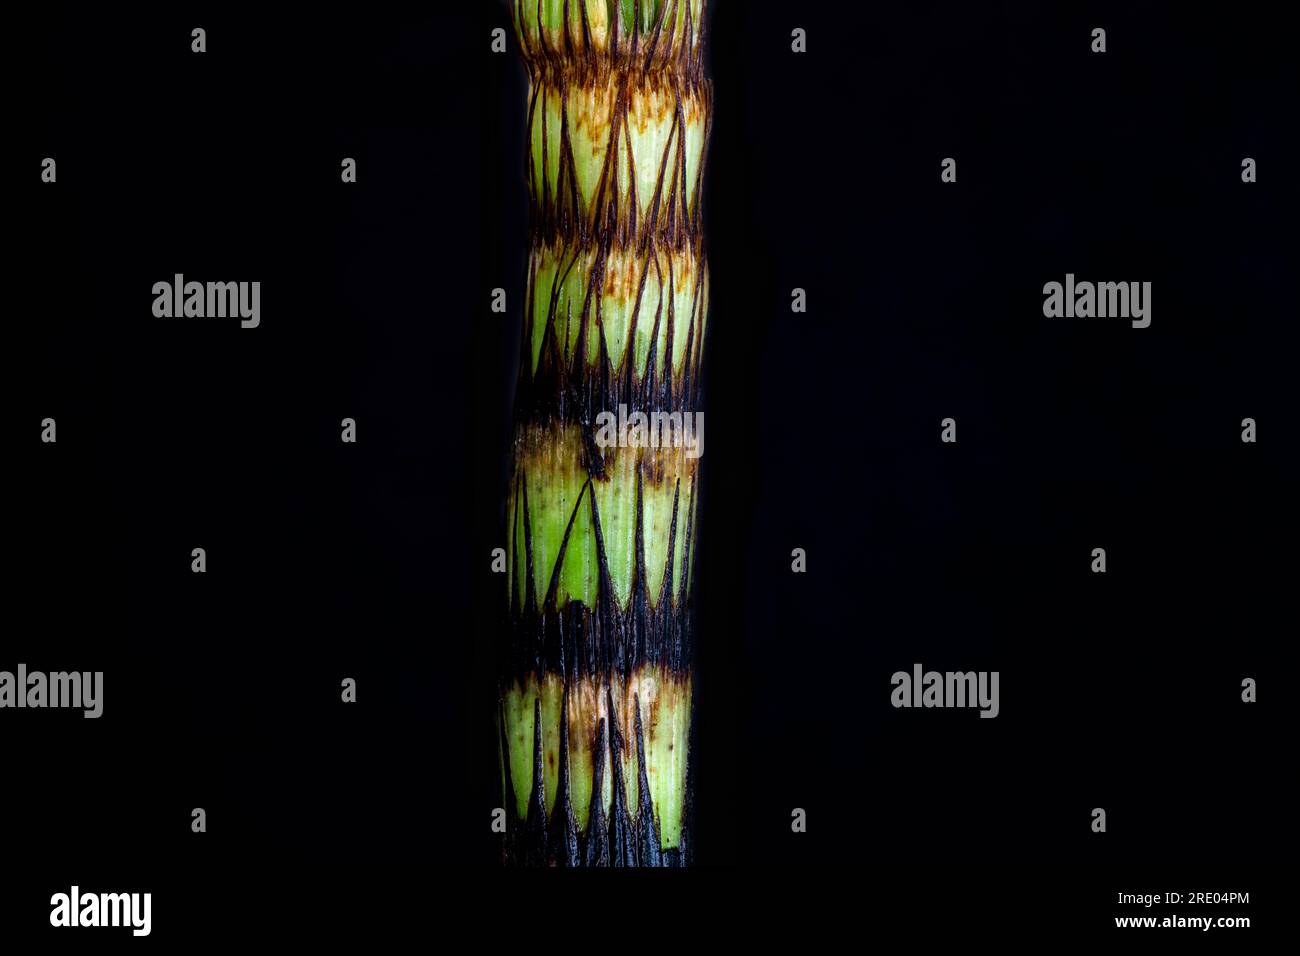 great horsetail, northern giant horsetail (Equisetum telmateia, Equisetum telmateja, Equisetum maximum), sprout against black background, Netherlands Stock Photo